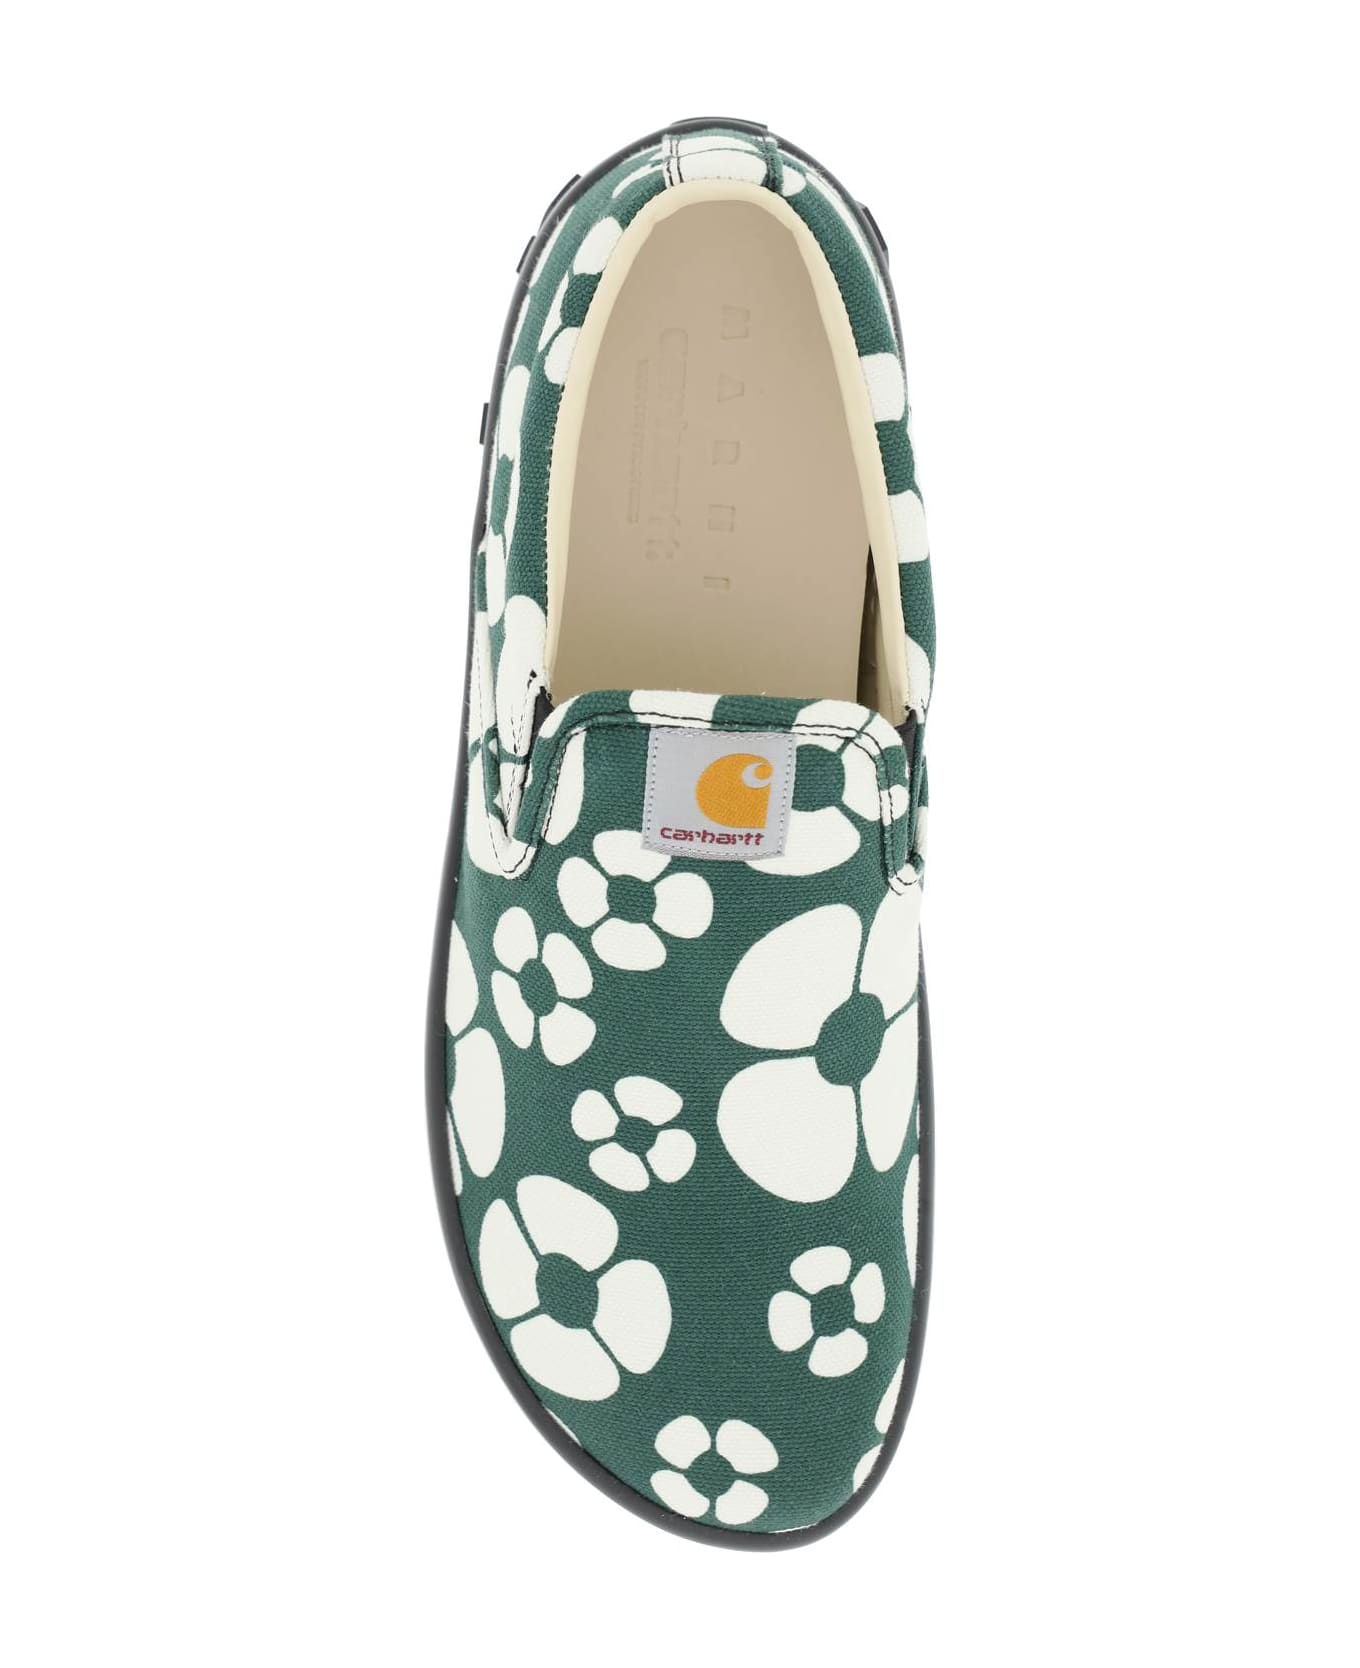 Marni Slip-on Sneakers - FOREST GREEN STONE WHITE (Green)